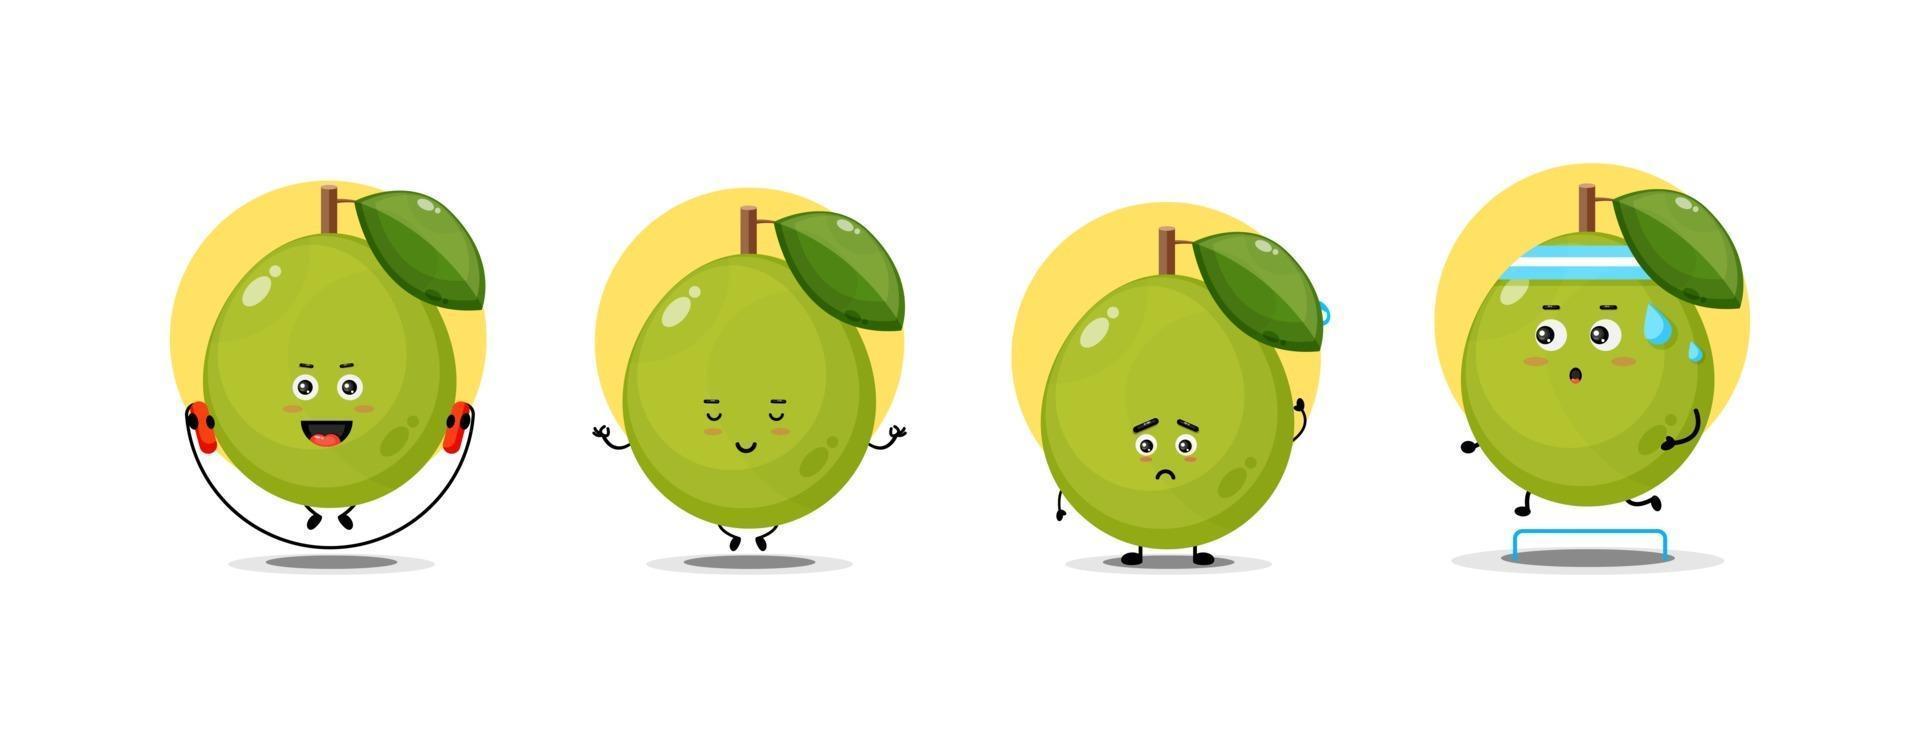 Cute guava character collection vector